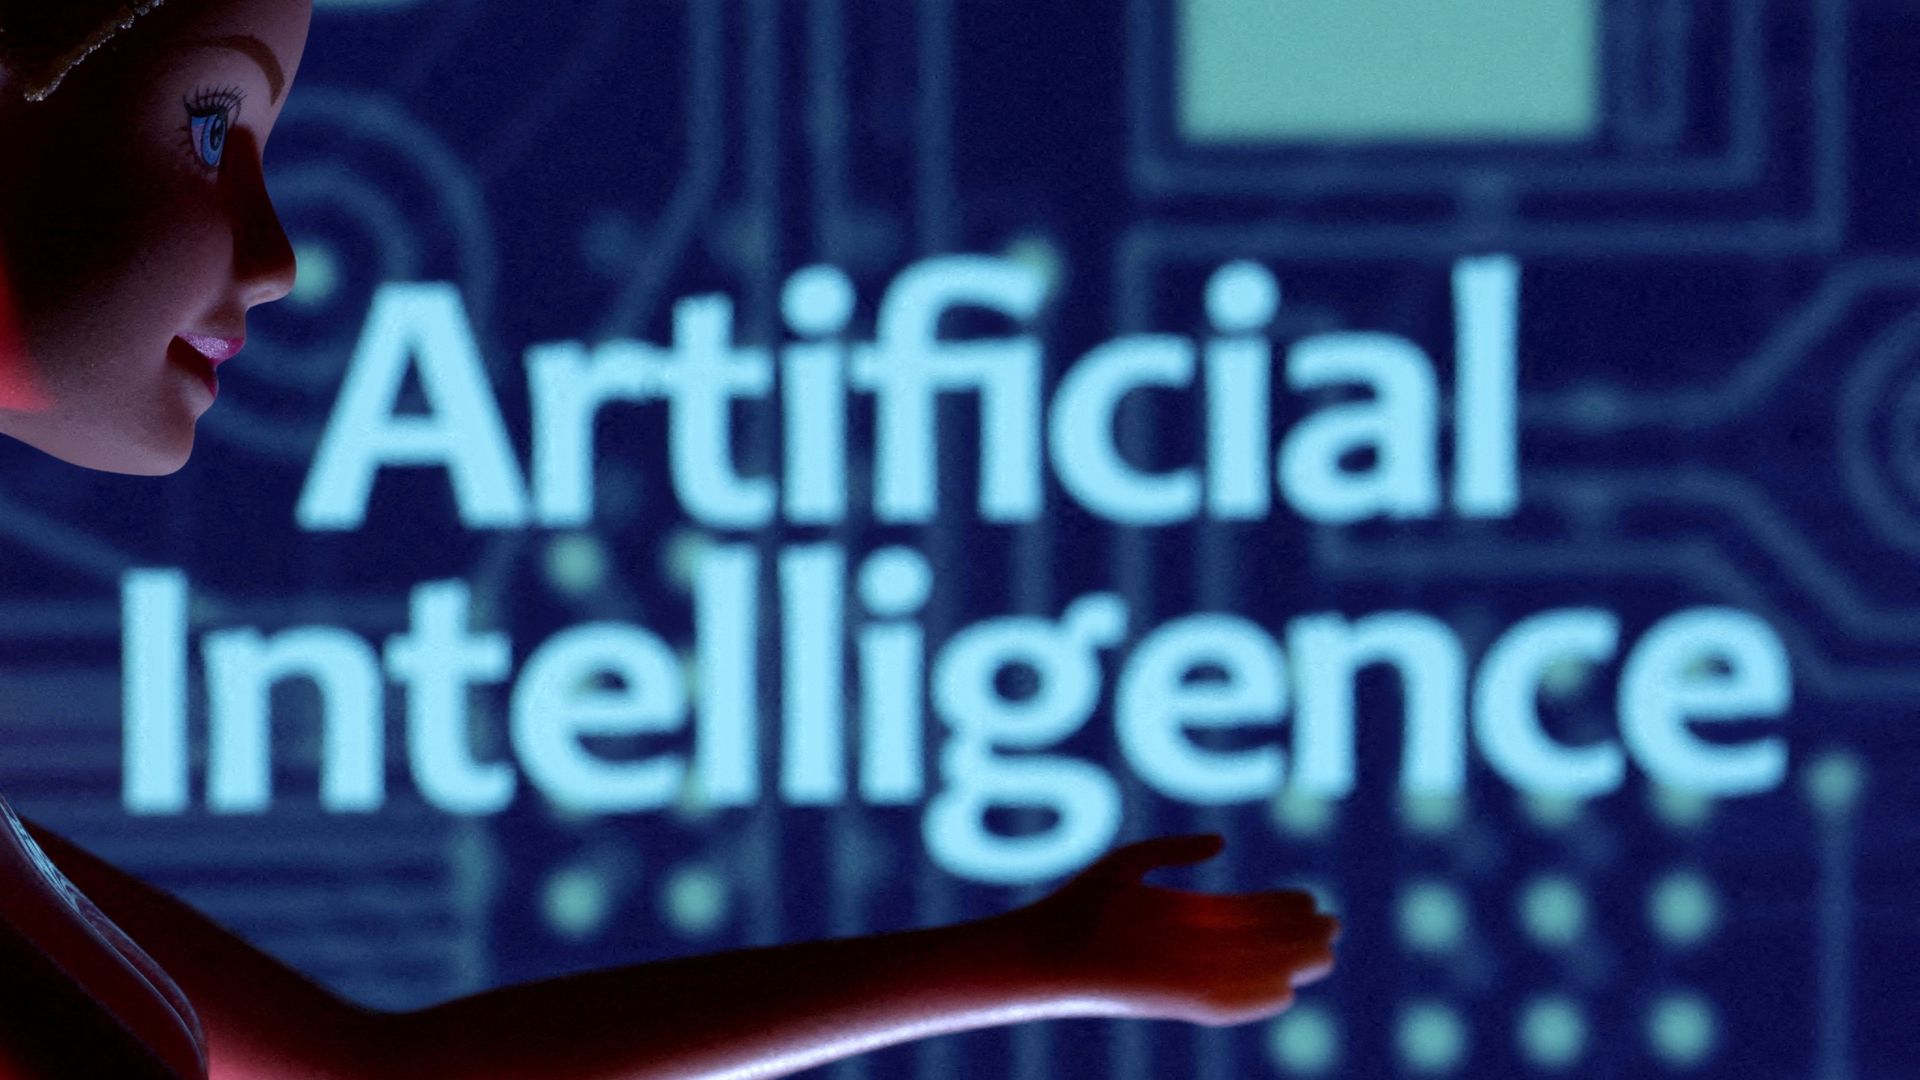 AI regulators 'under-resourced' compared to developers, committee warns...